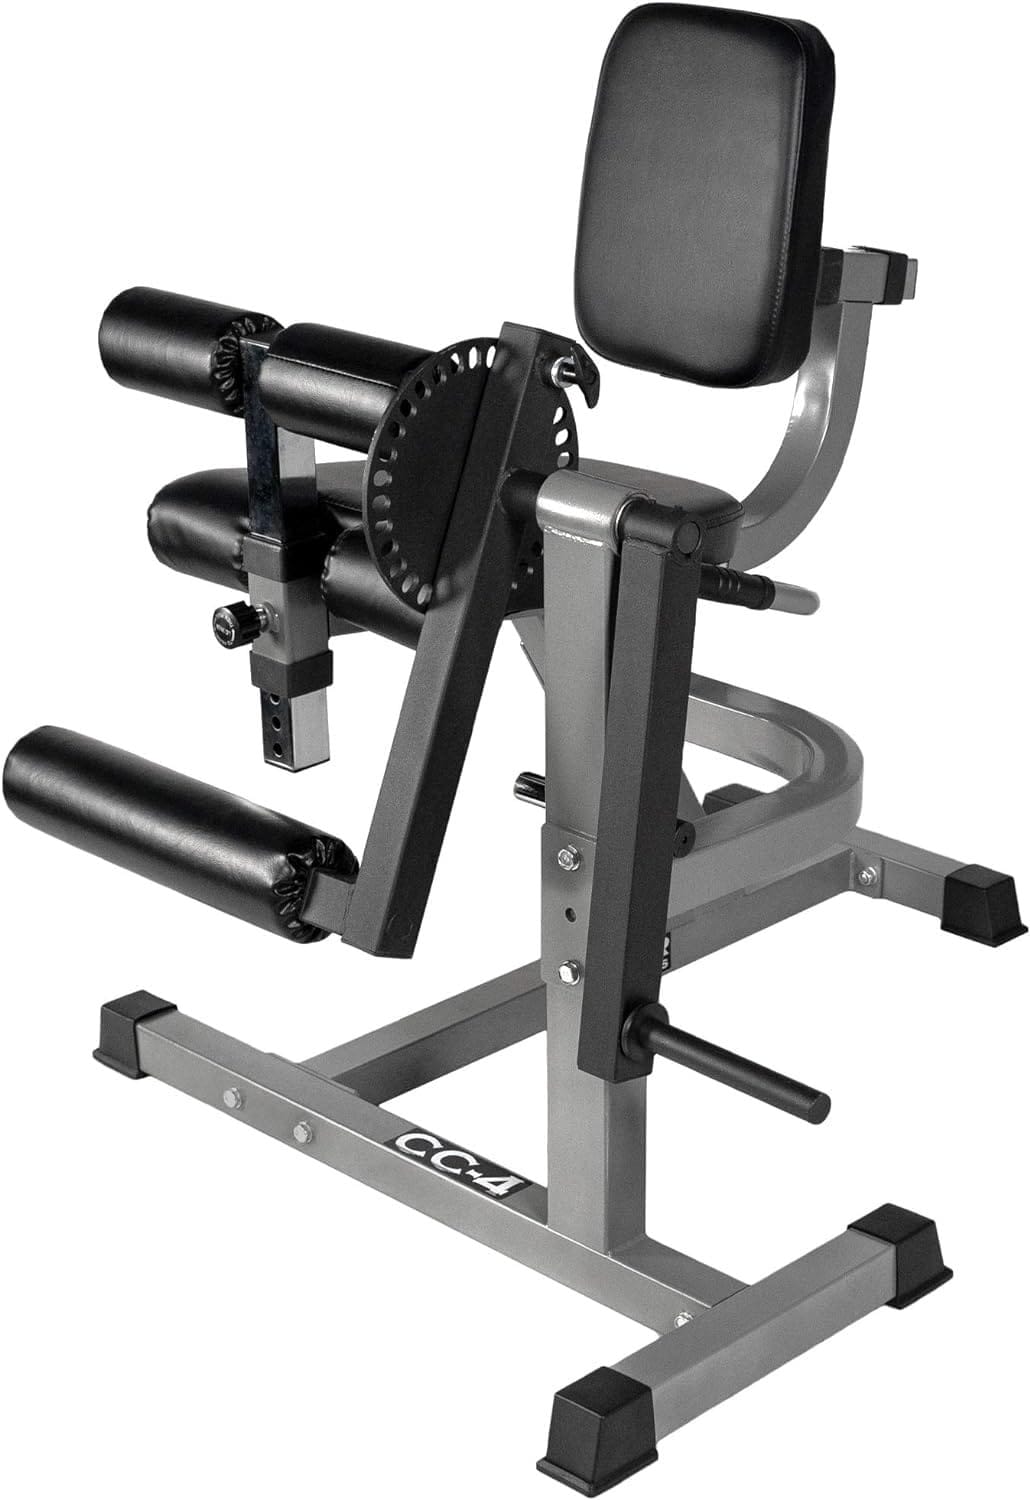 Valor Fitness CC-4 Adjustable Leg Curl Extension Machine 8 Positions- Plate Loaded Max Weight 150 lbs - Home Gym Hamstring Workout, Quad Exercise Equipment